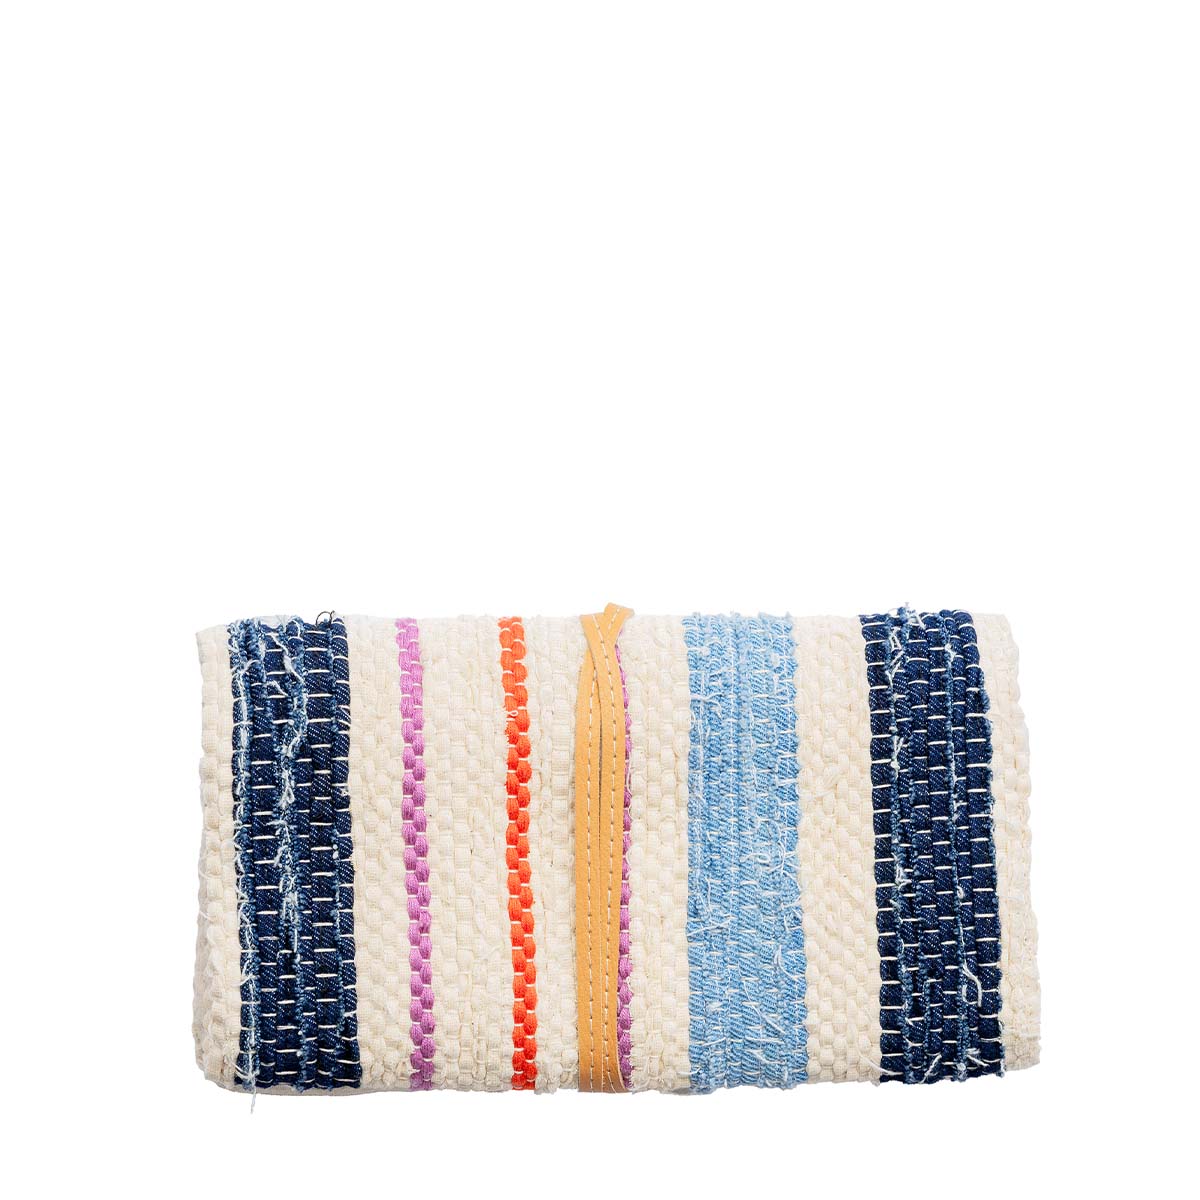 The back of the hand woven artisan Rebeca Tech Case in Spring Sherbert. It has dark blue, pink, orange, and light blue woven vertical stripes. It is wrapped in a leather cord.